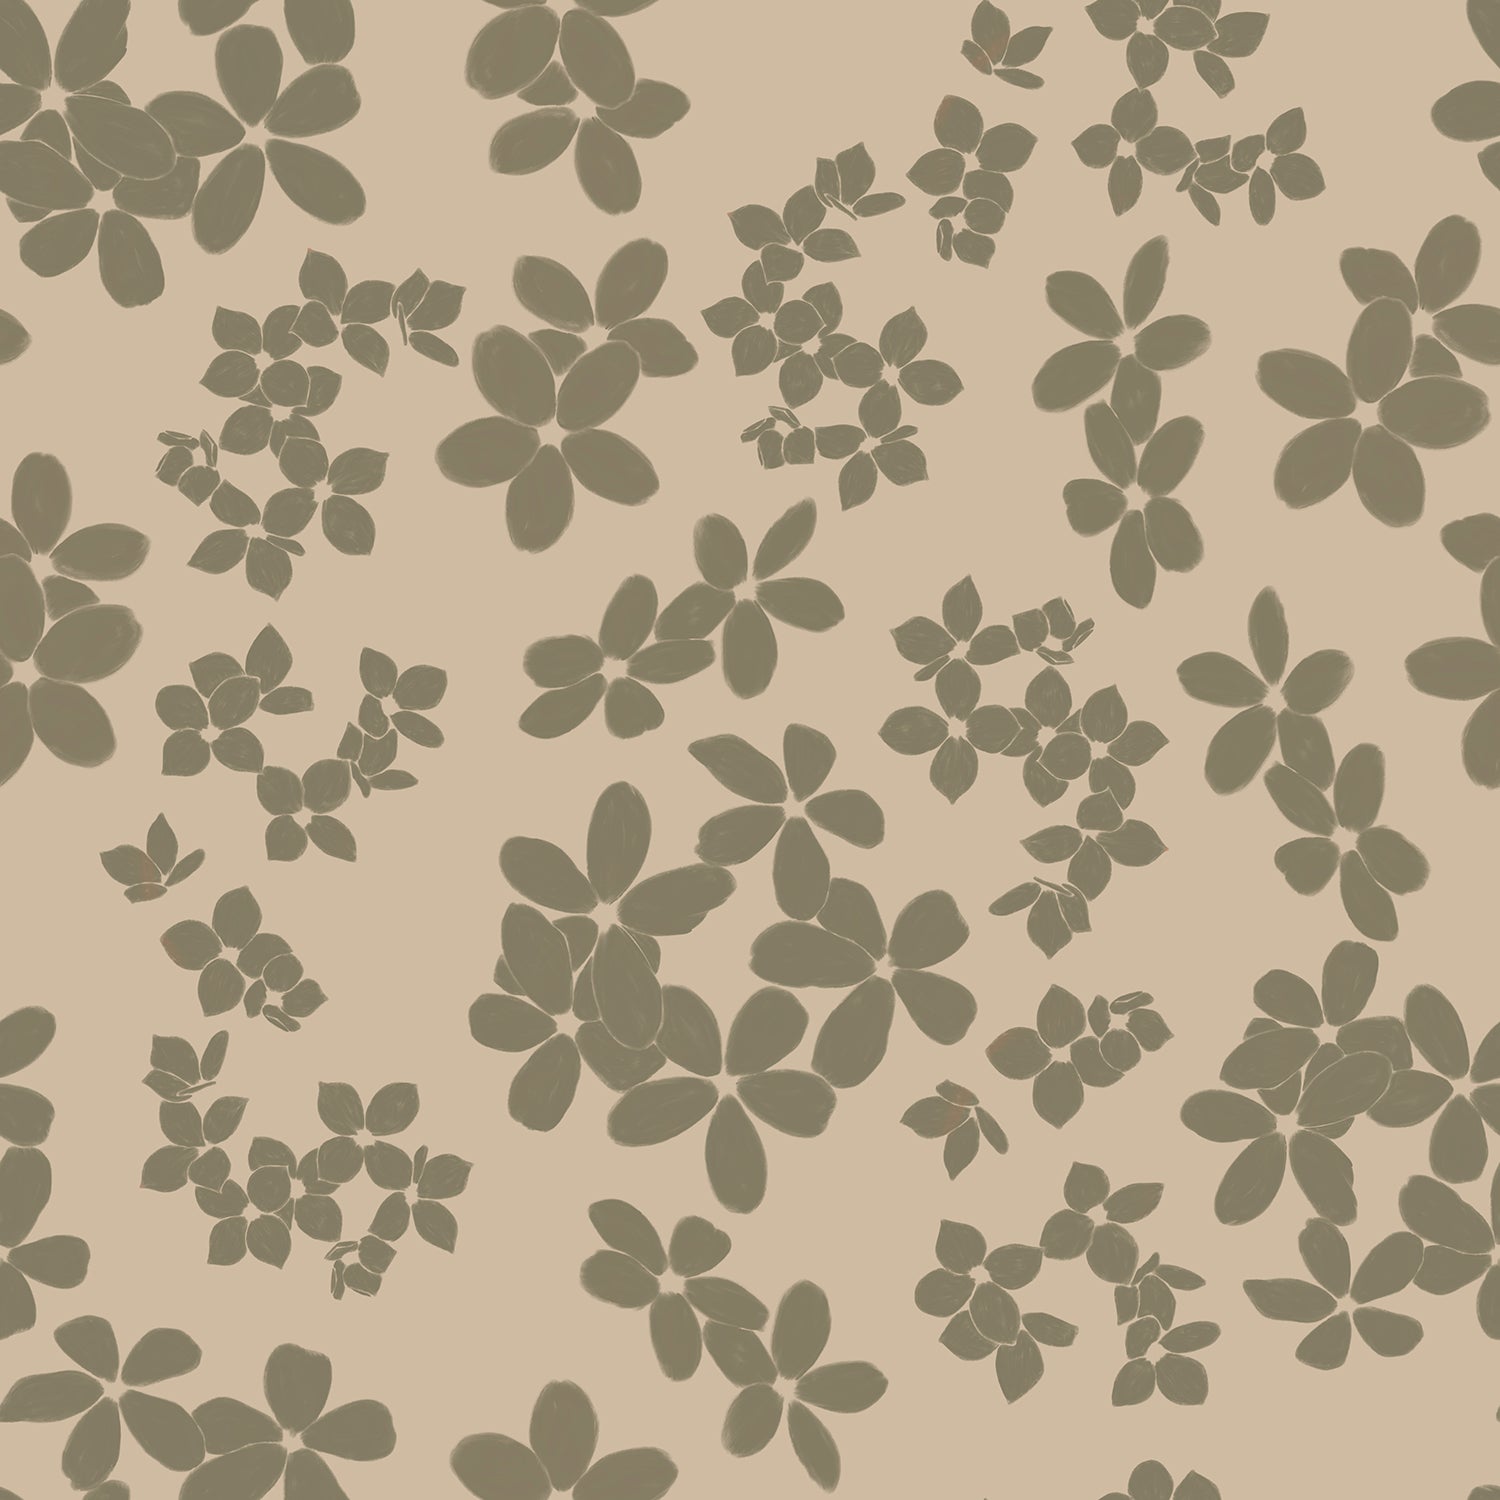 A charming wallpaper design featuring small, dark green floral motifs scattered across a light beige background. The simple, stylized representation of the flowers offers a subtle and elegant look, making it an ideal choice for creating a calming and sophisticated atmosphere in any interior setting.